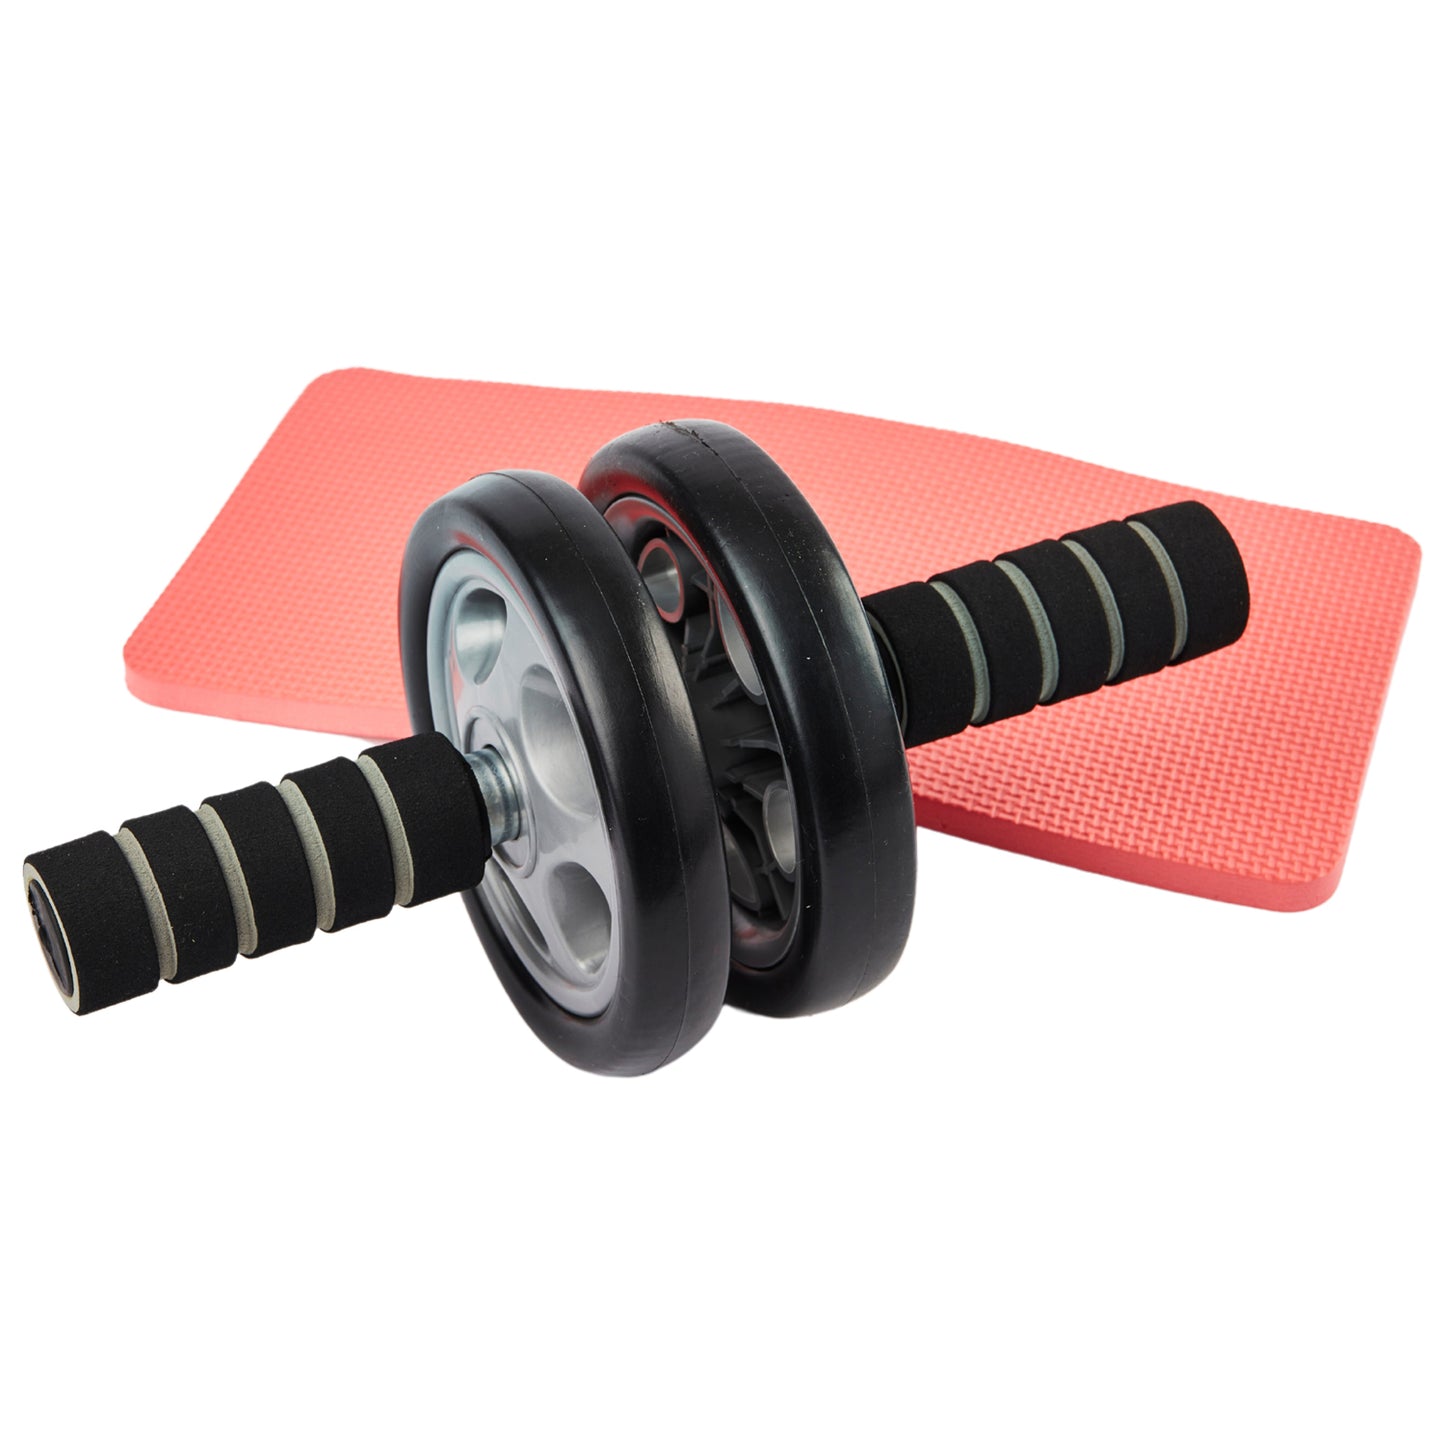 MAXSTRENGTH Ab Wheel Roller Abdominal Core Workout